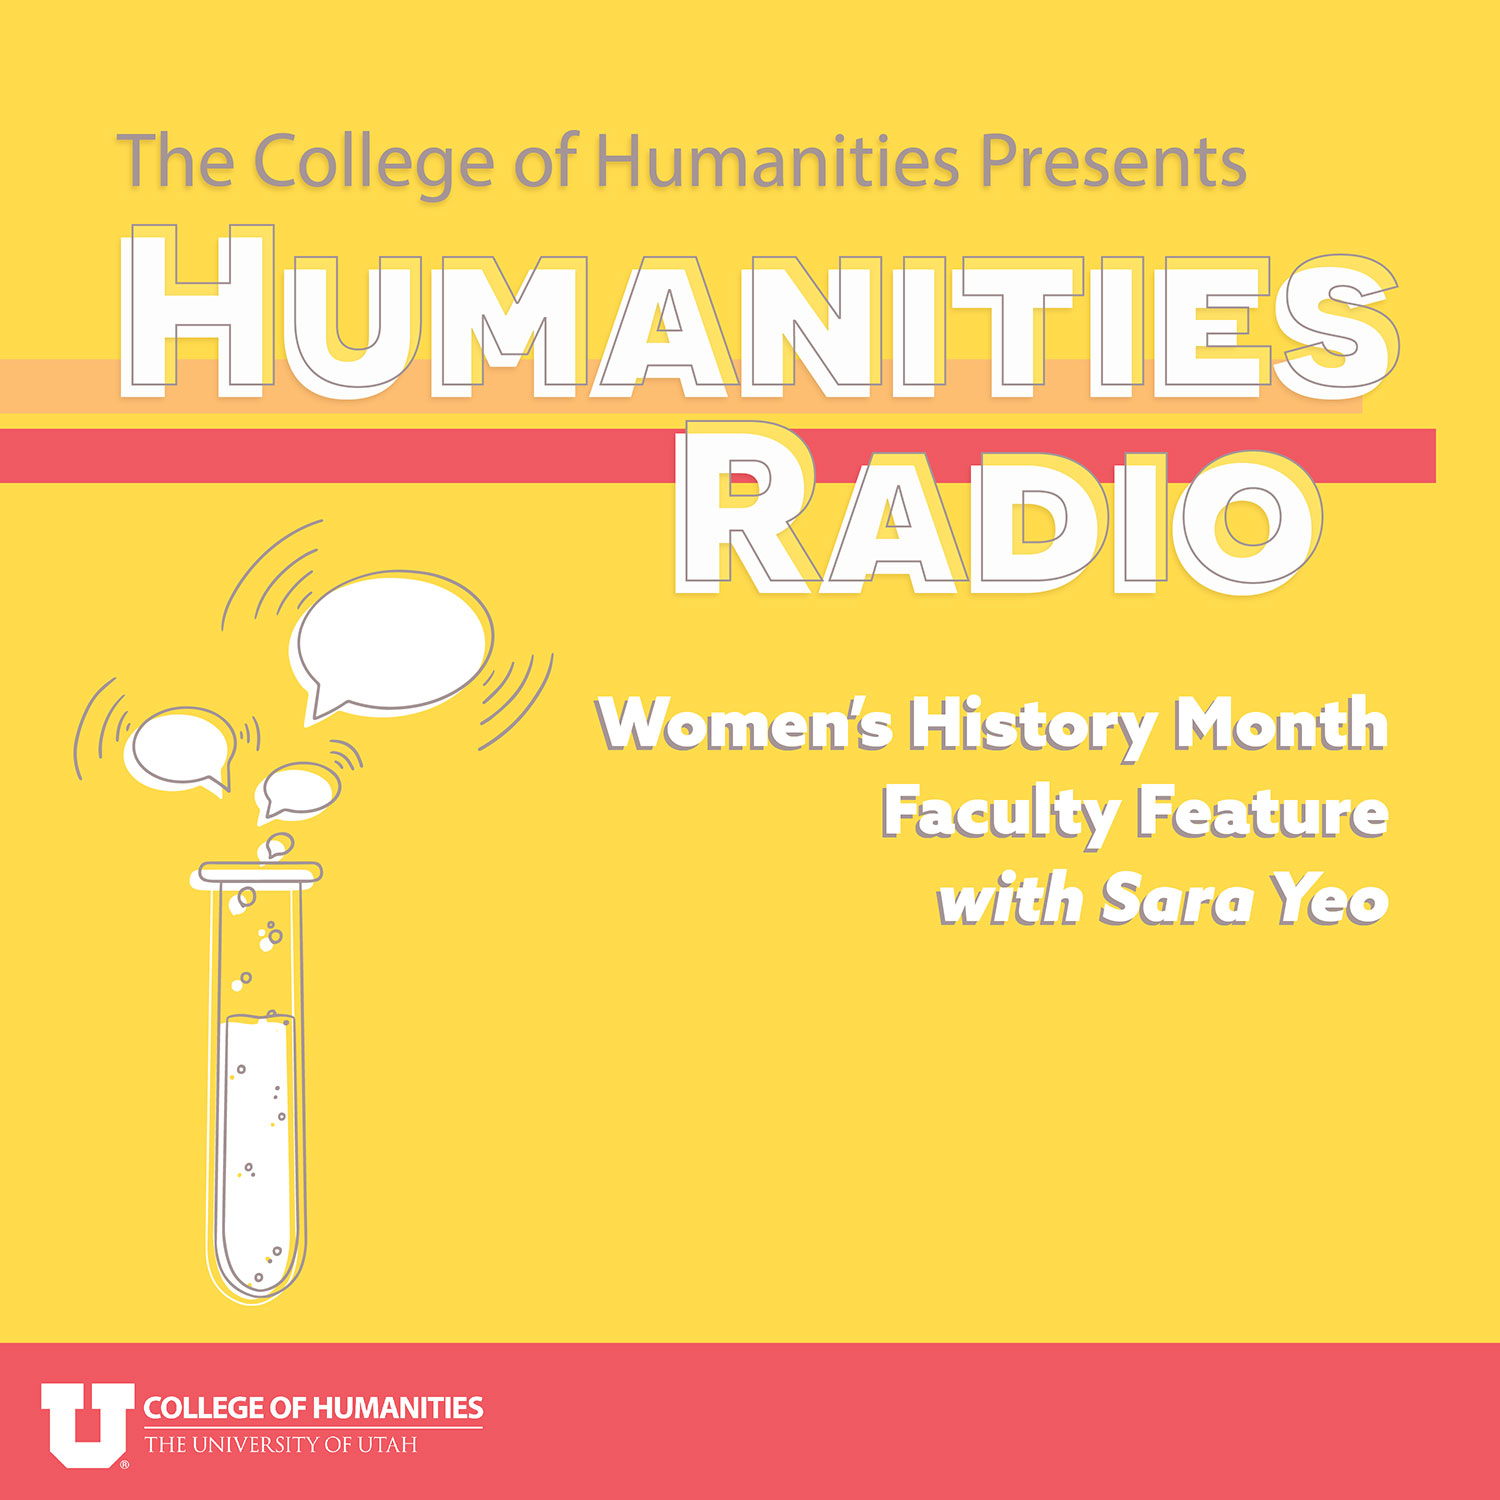 How about Women’s History Month Faculty Feature with Sara Yeo